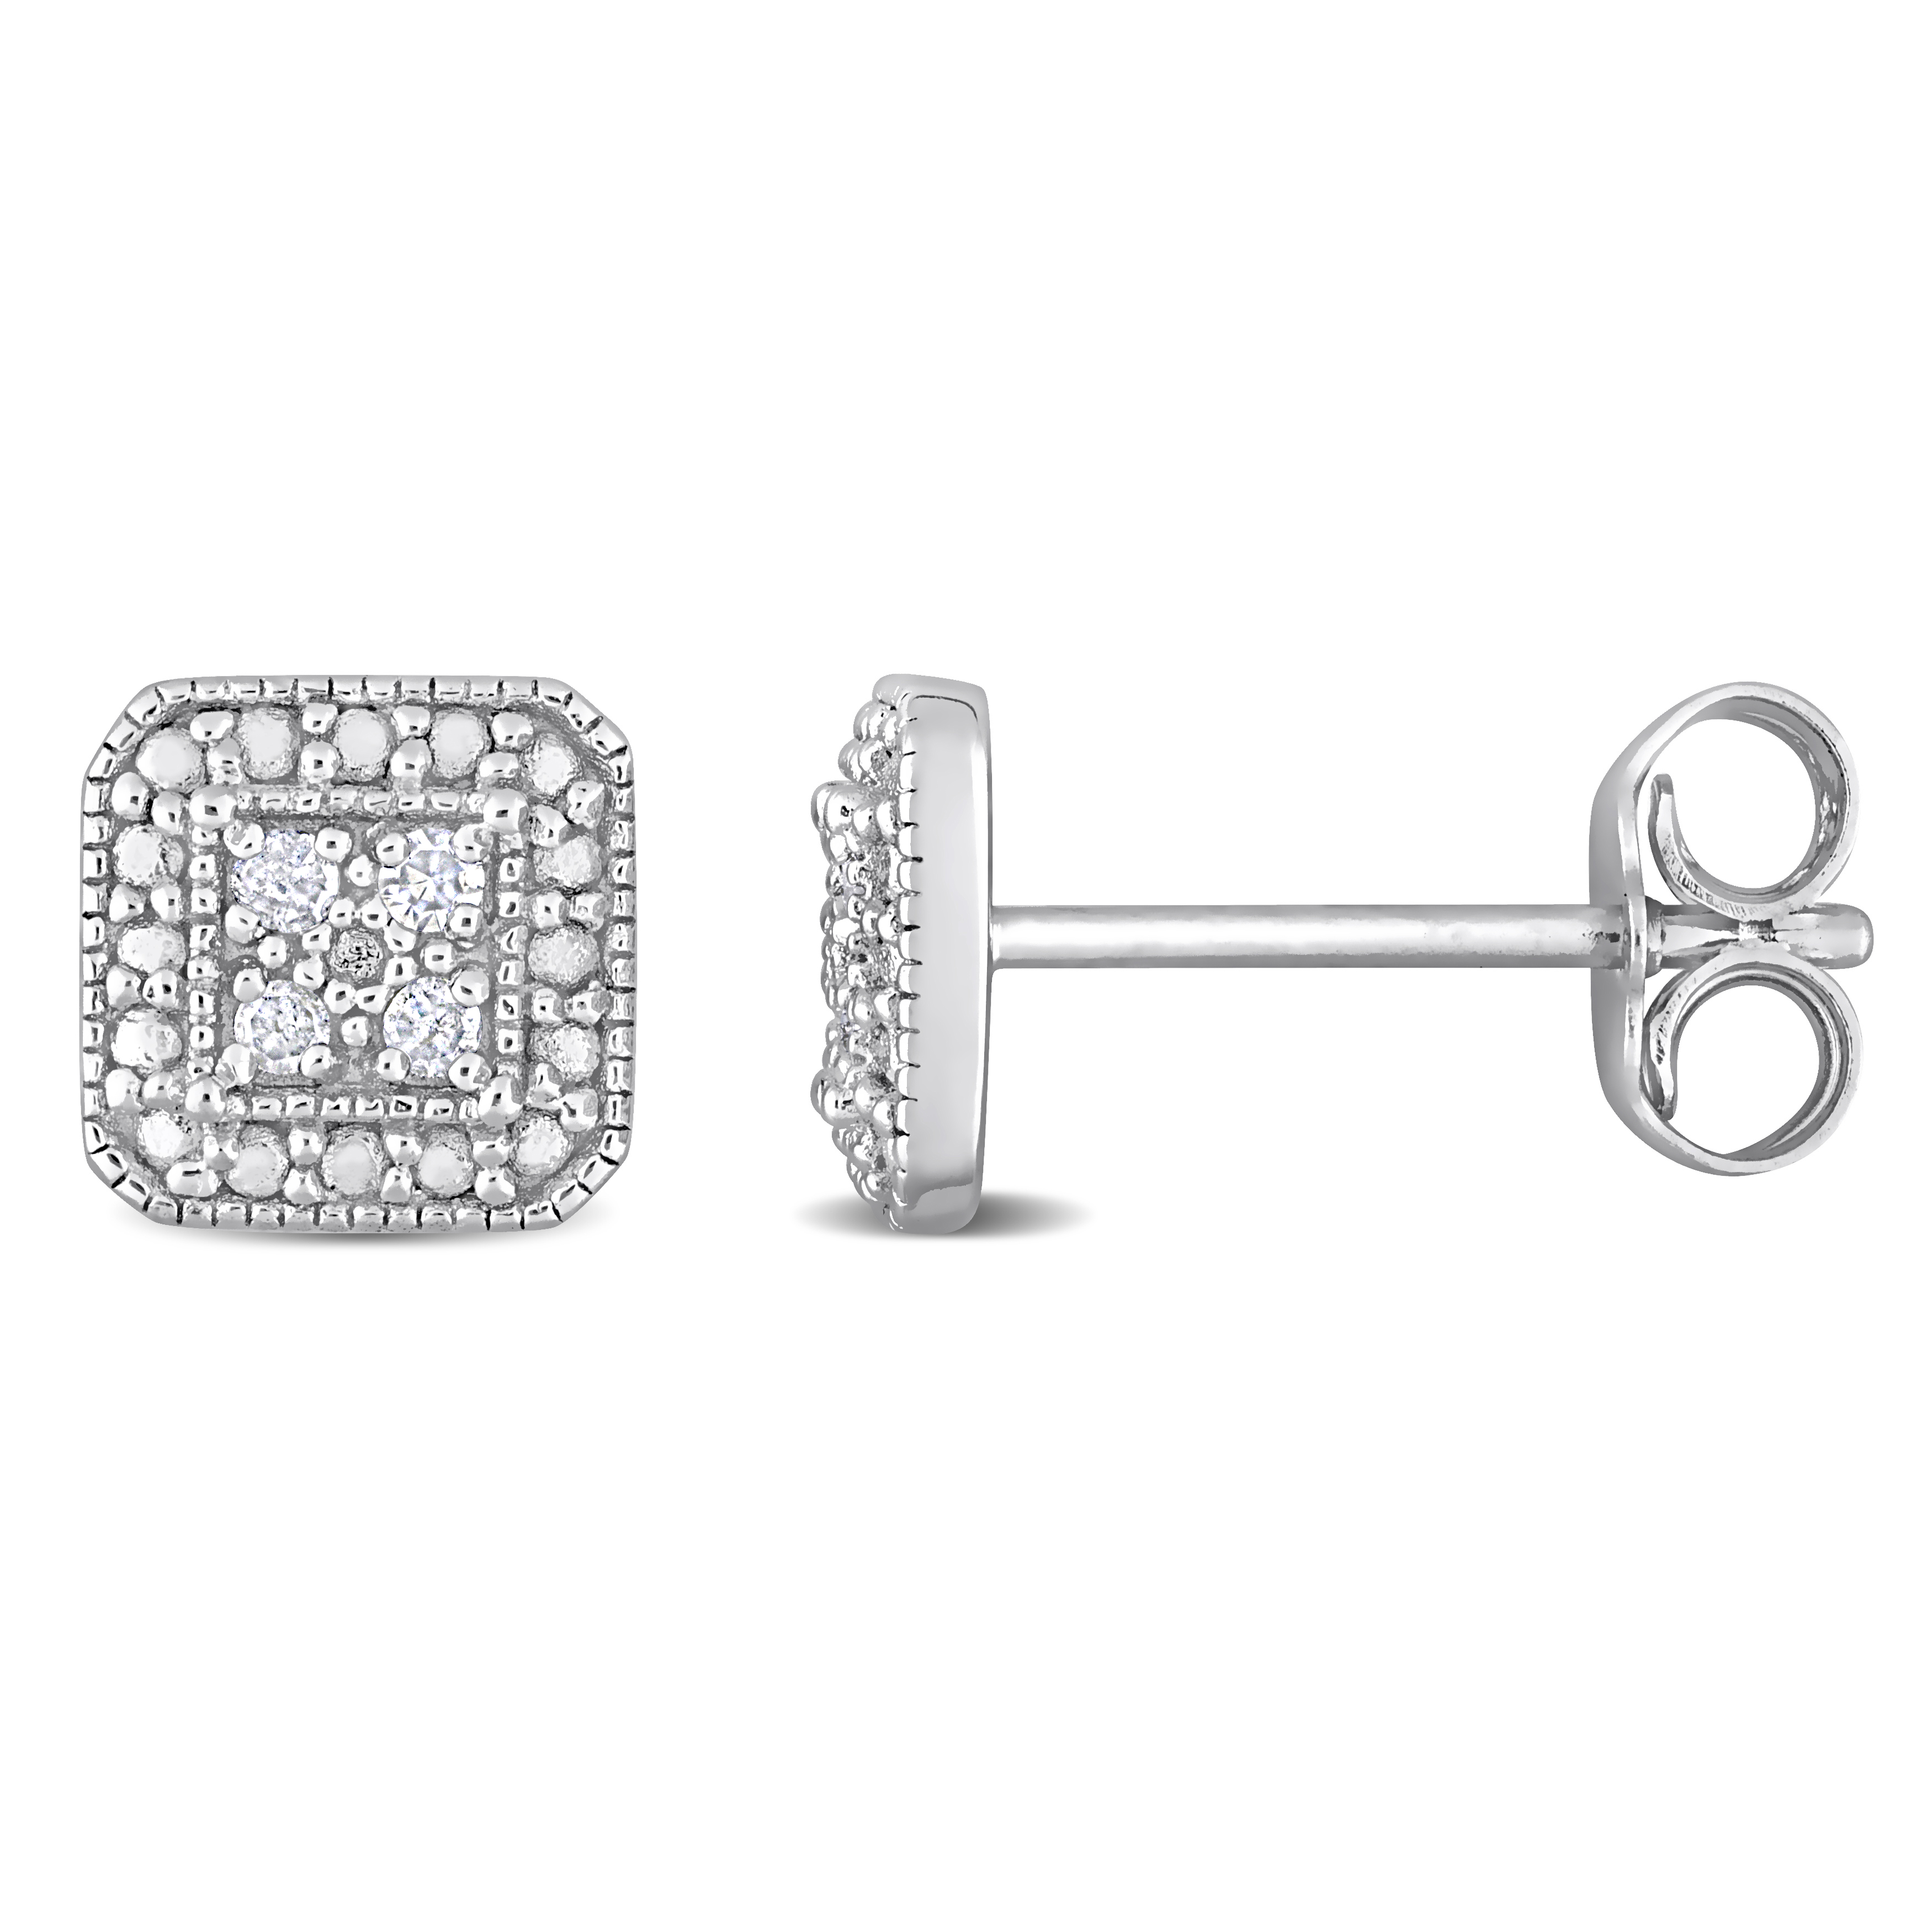 1/10 CT TW Diamond Square Cluster Stud Earrings in Sterling Silver